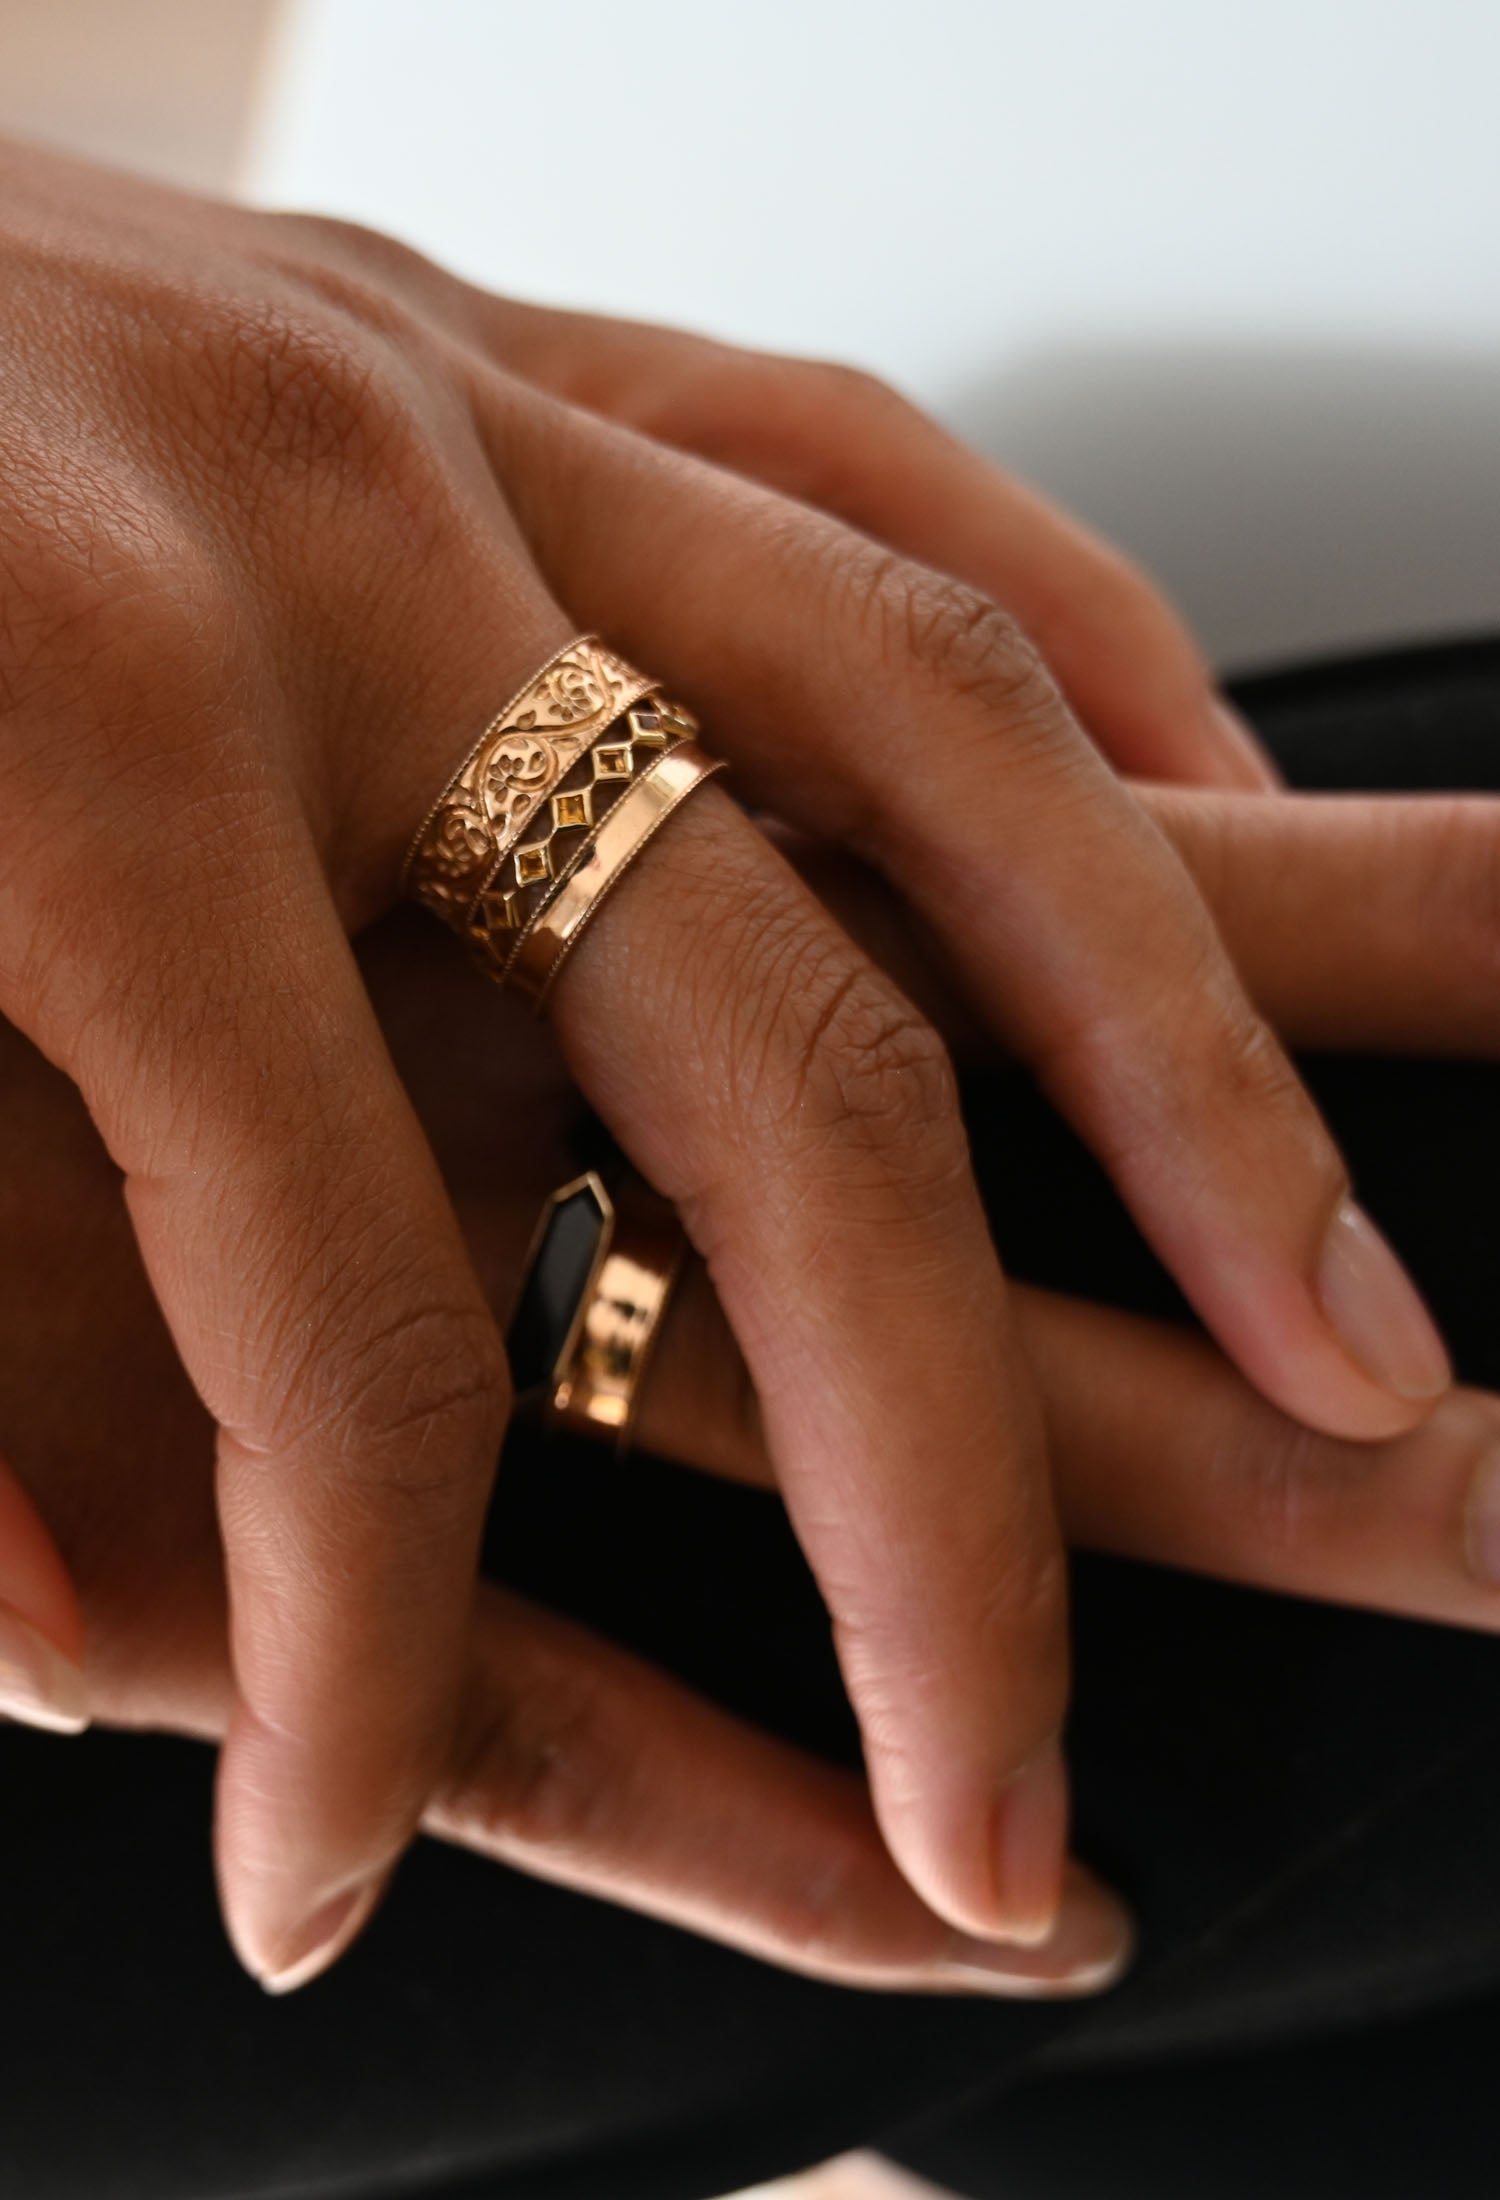 Model's hand wearing multiple Metier gold rings in a stack